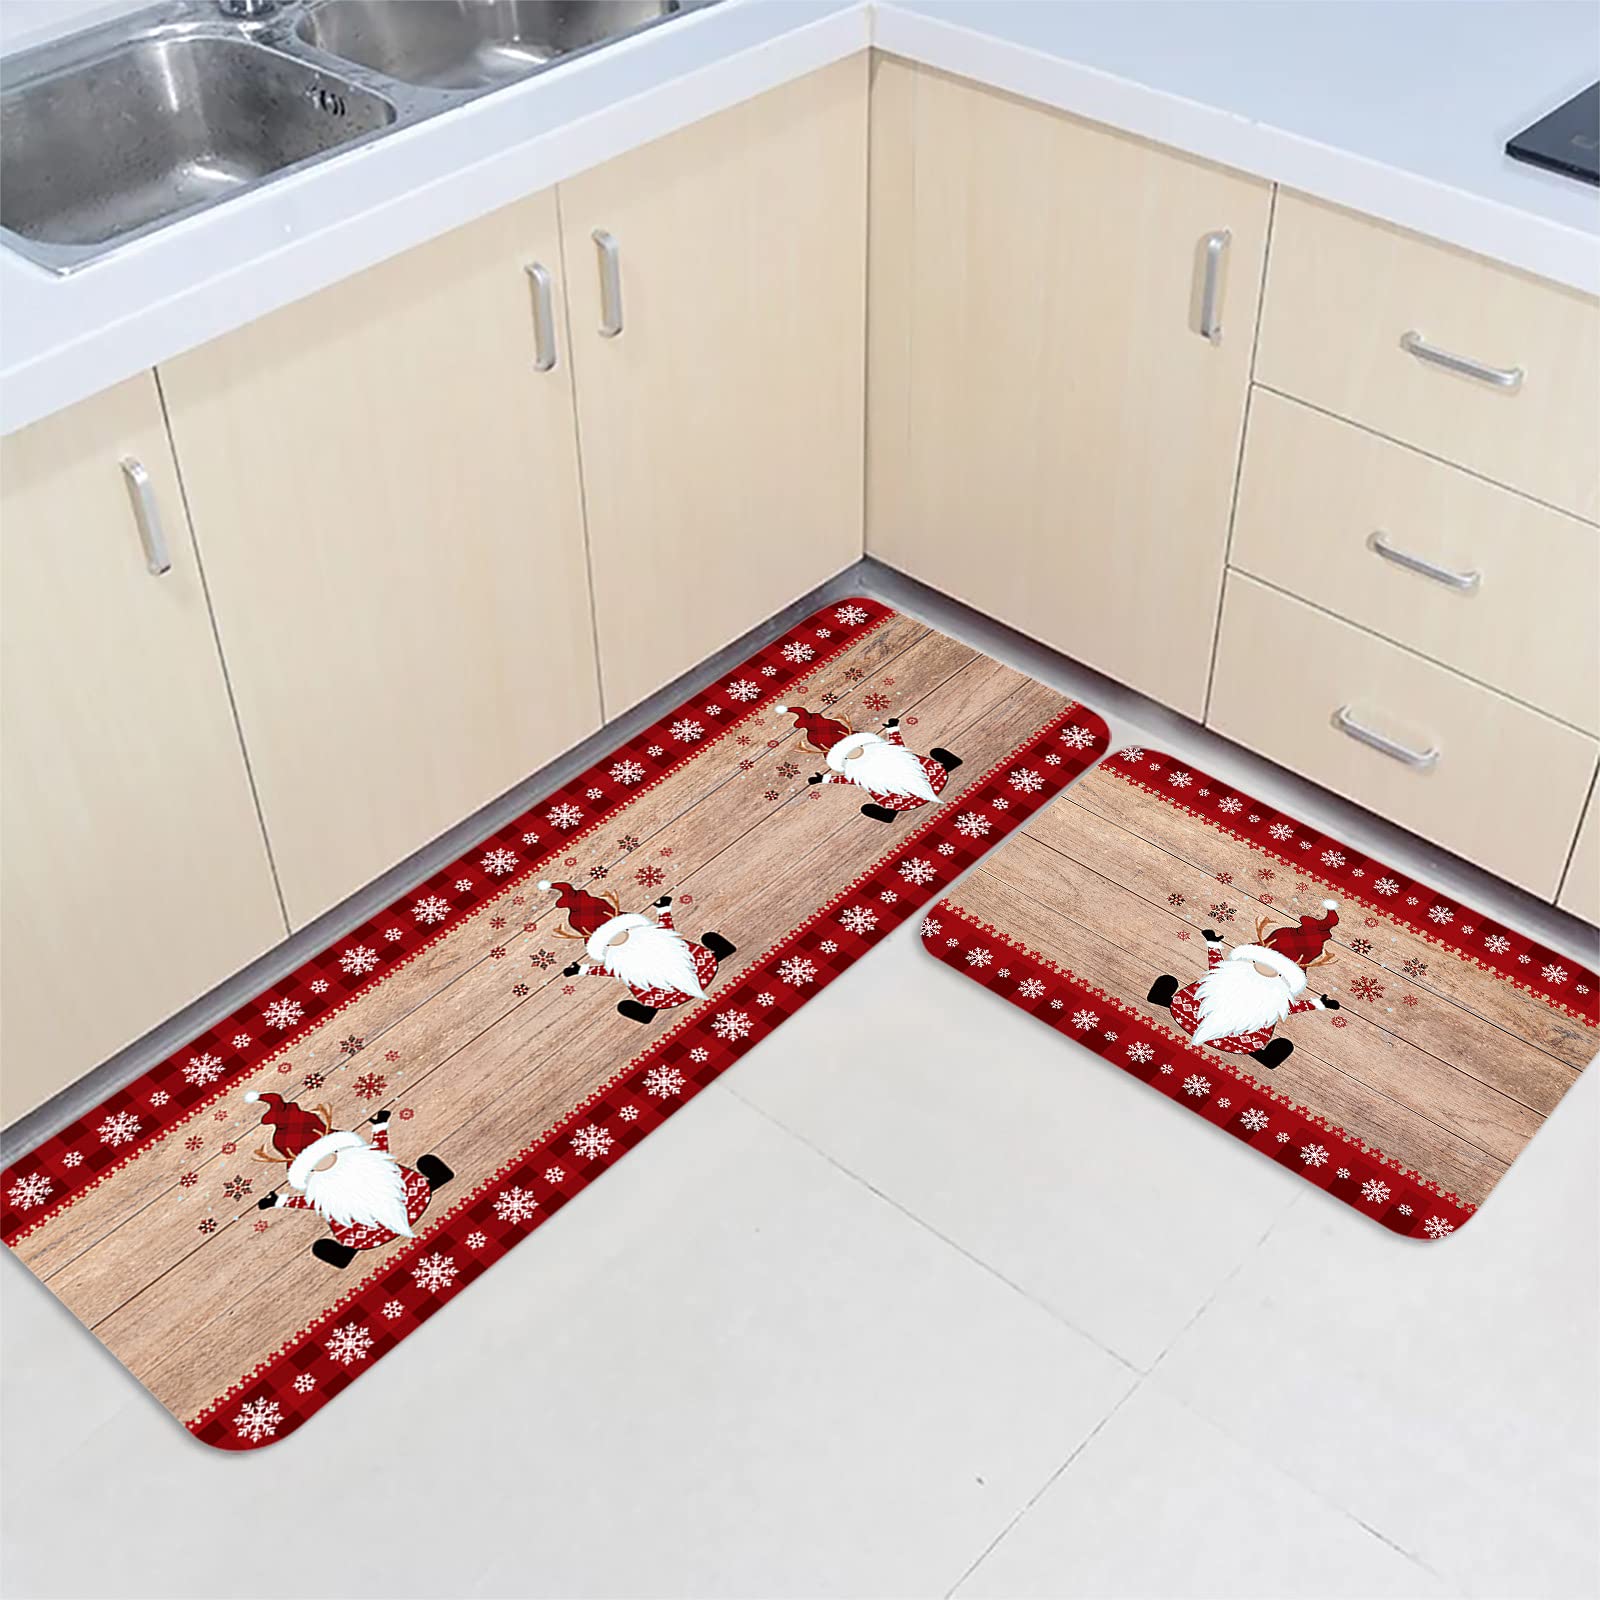 KITHOME Gnome Christmas Kitchen Mats Sets 2 Piece,Xmas Happy Gnome Snowflake Rustic Wooden Grain Kitchen Rugs and Mats Non-Slip Washable Runner Carpets for Christmas Decorations, 20" x 24"+20" x 48"